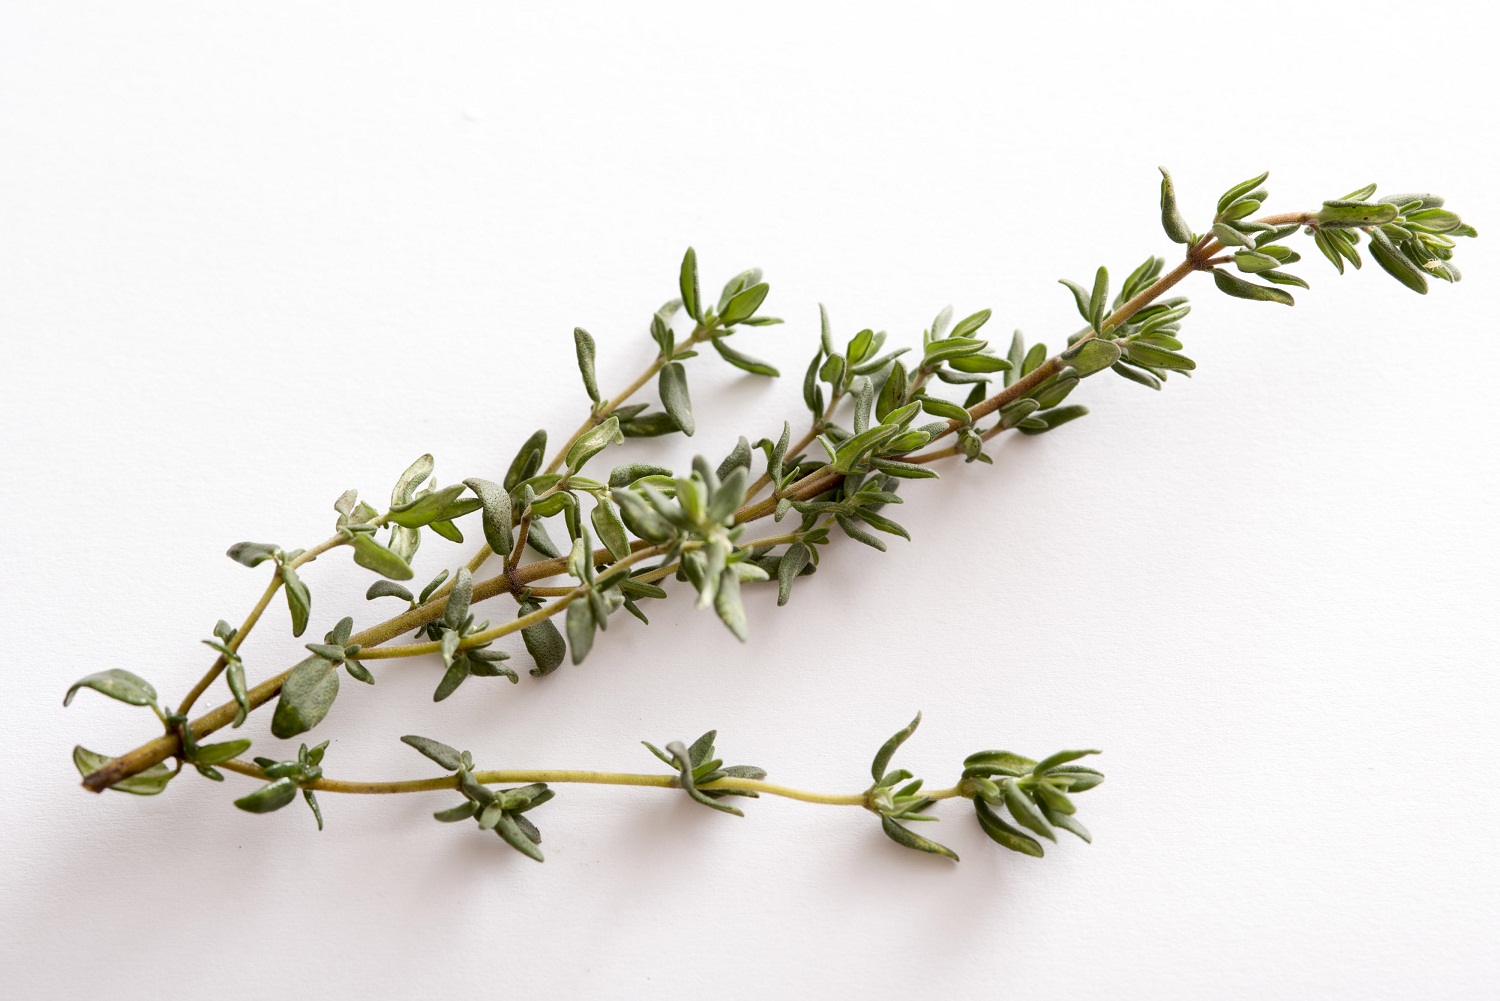 What Are Sprigs Of Thyme